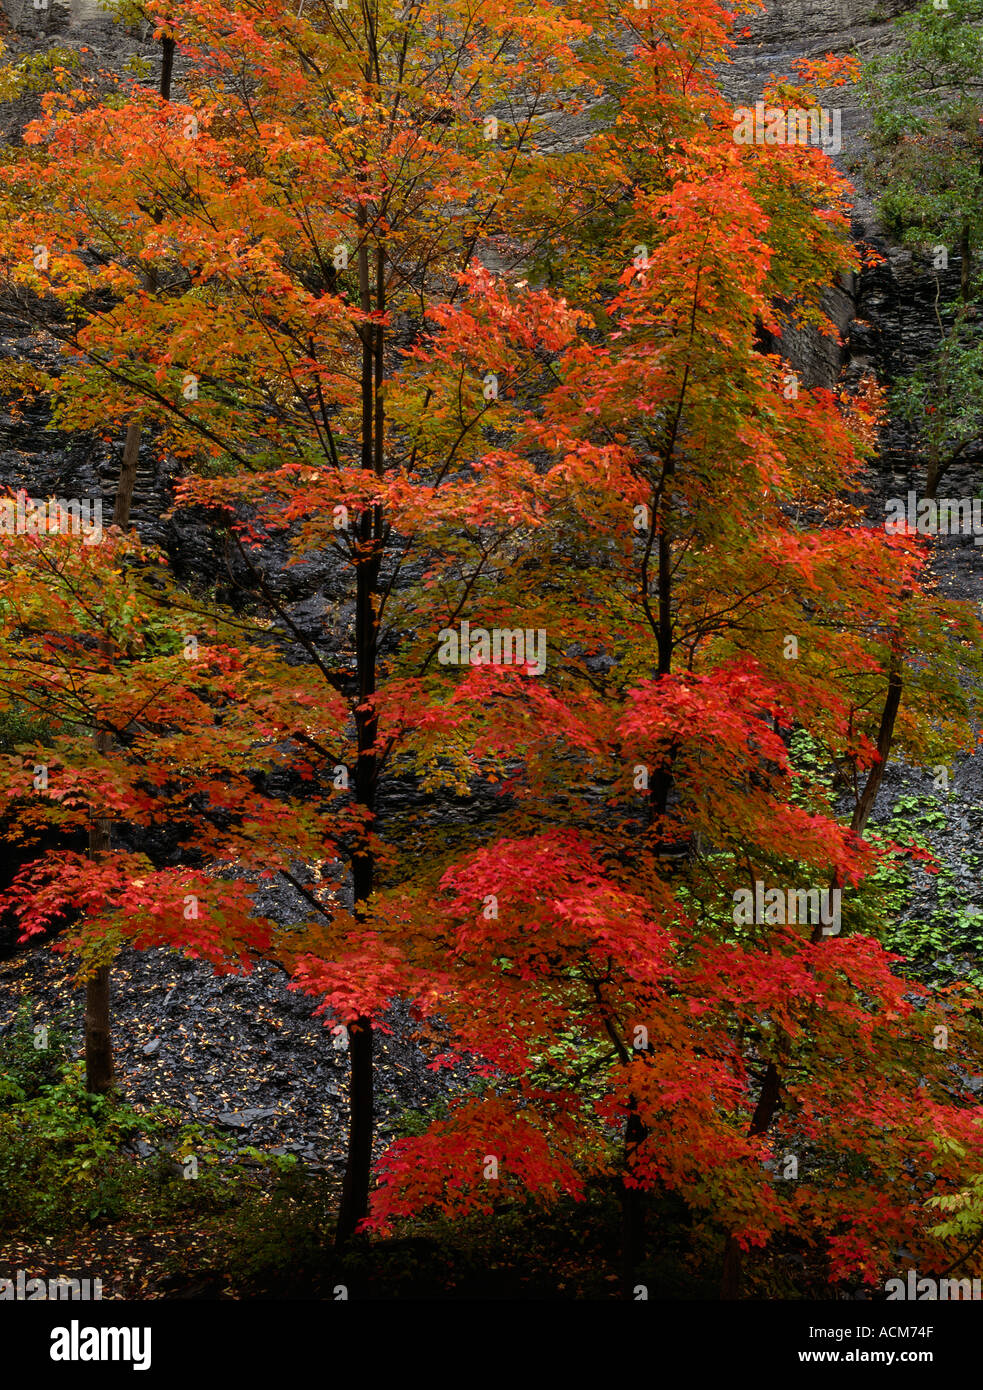 Autumn Maple Leaves New York State USA Stock Photo